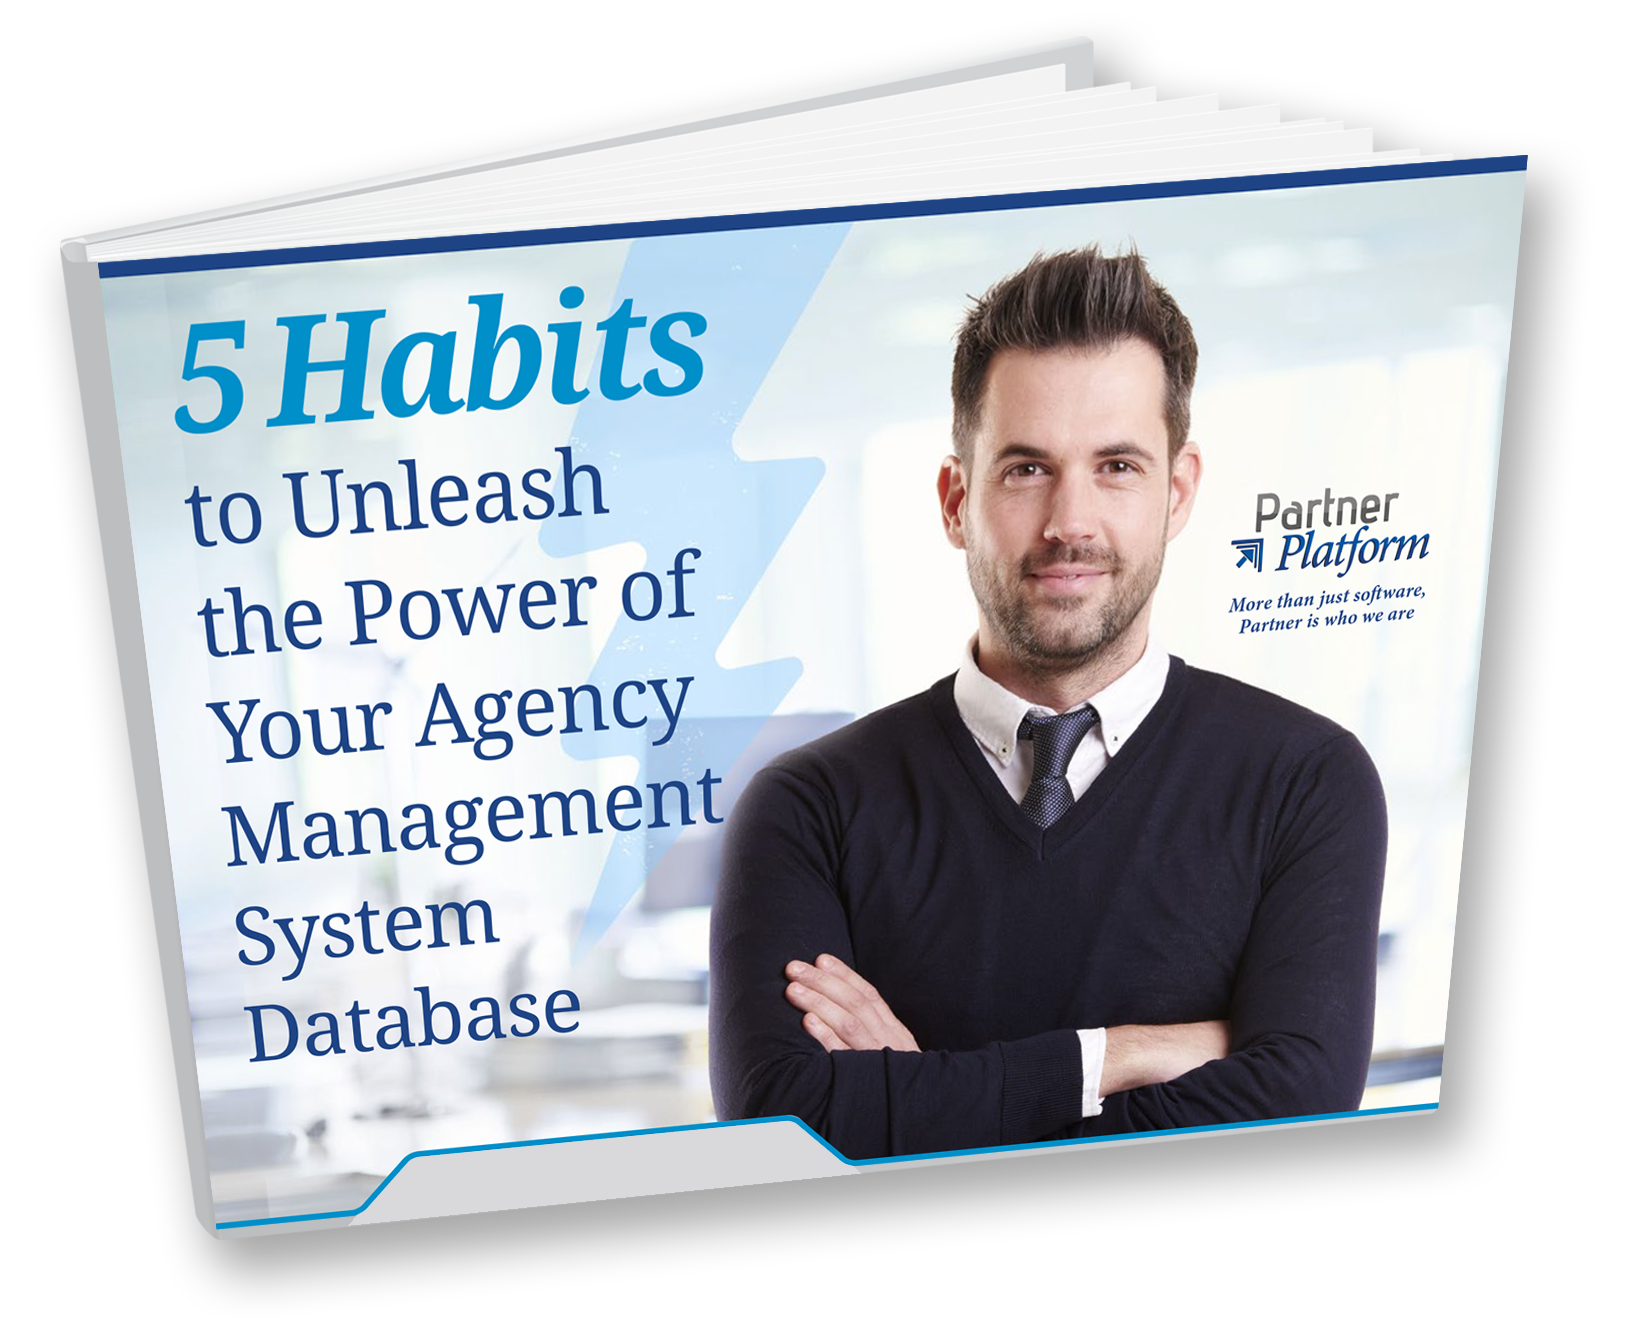 5 Habits to Unleash the Power of Your Agency Management System Database